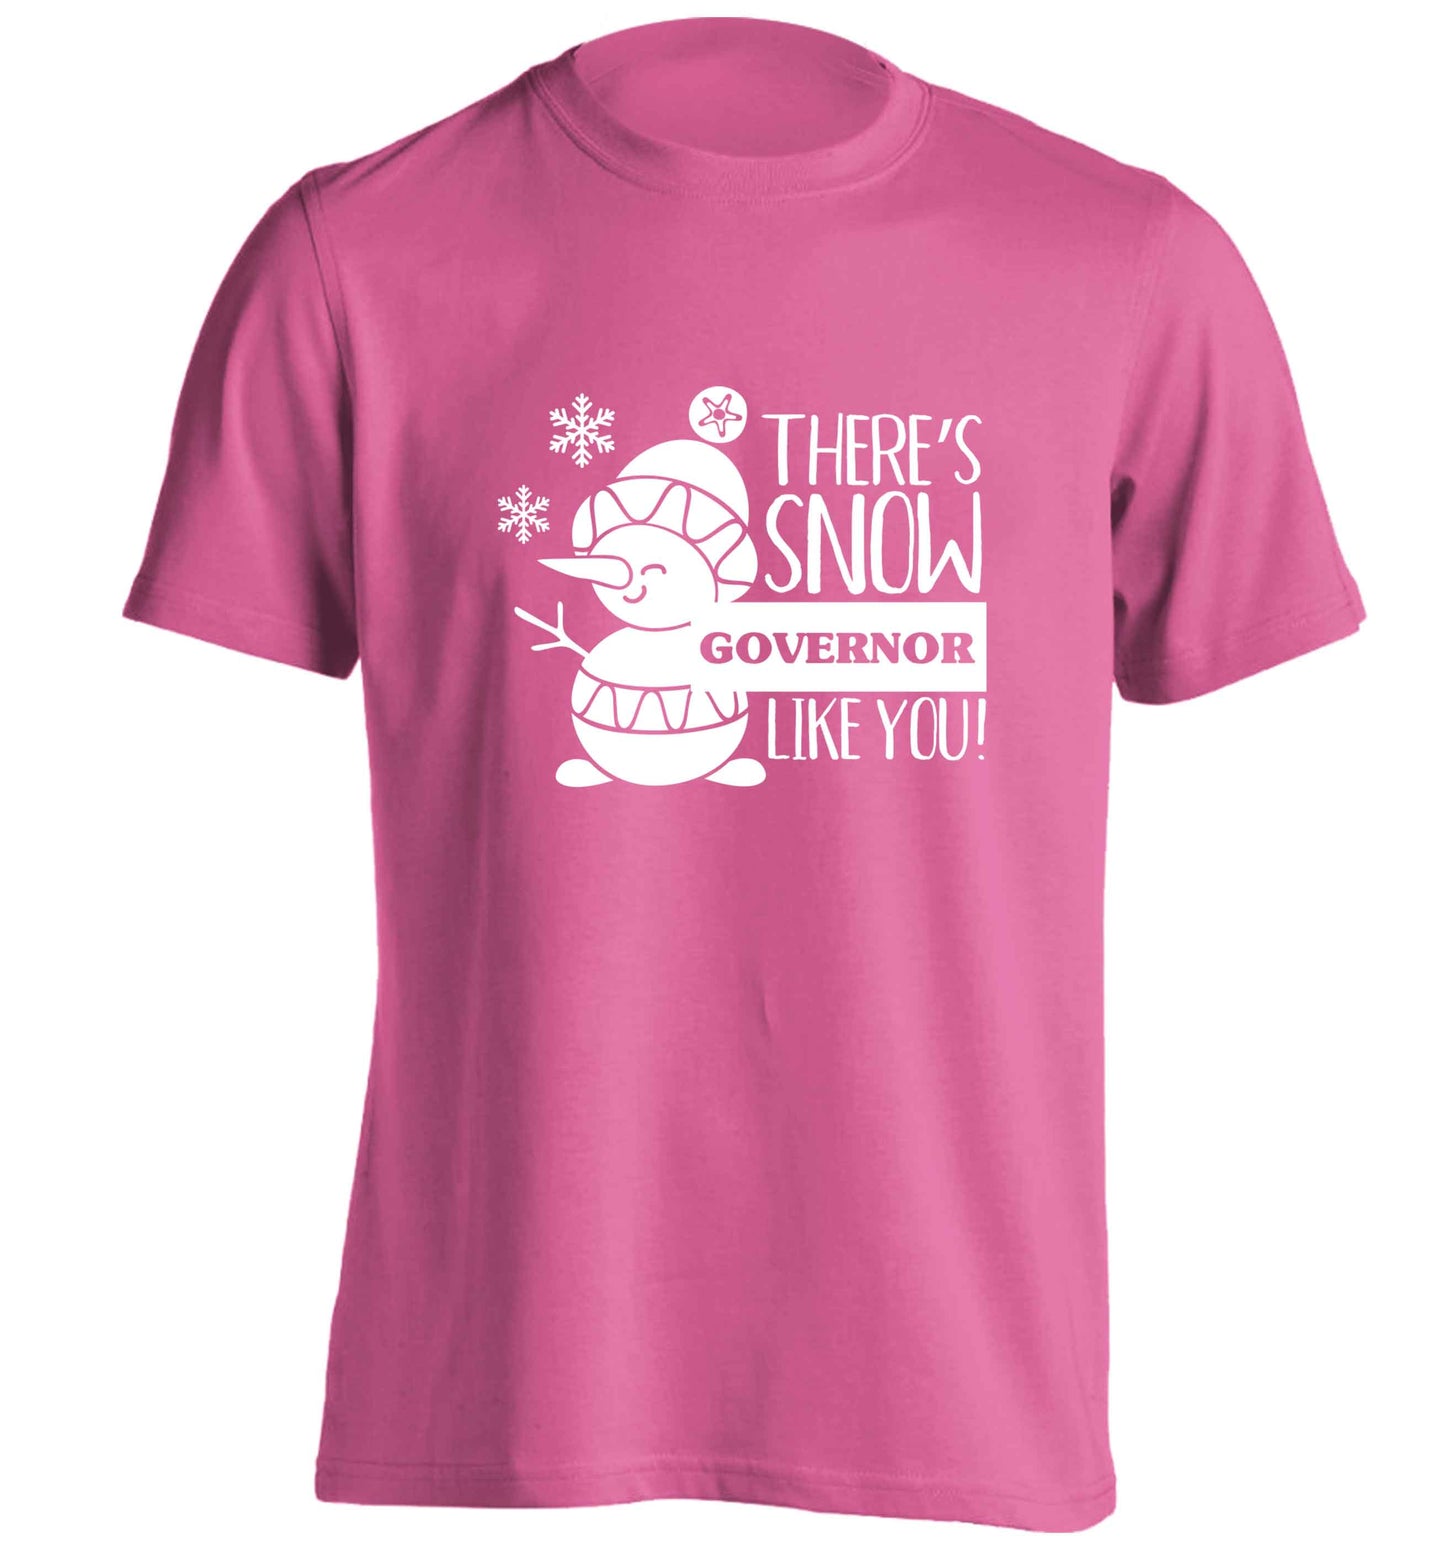 There's snow governor like you adults unisex pink Tshirt 2XL